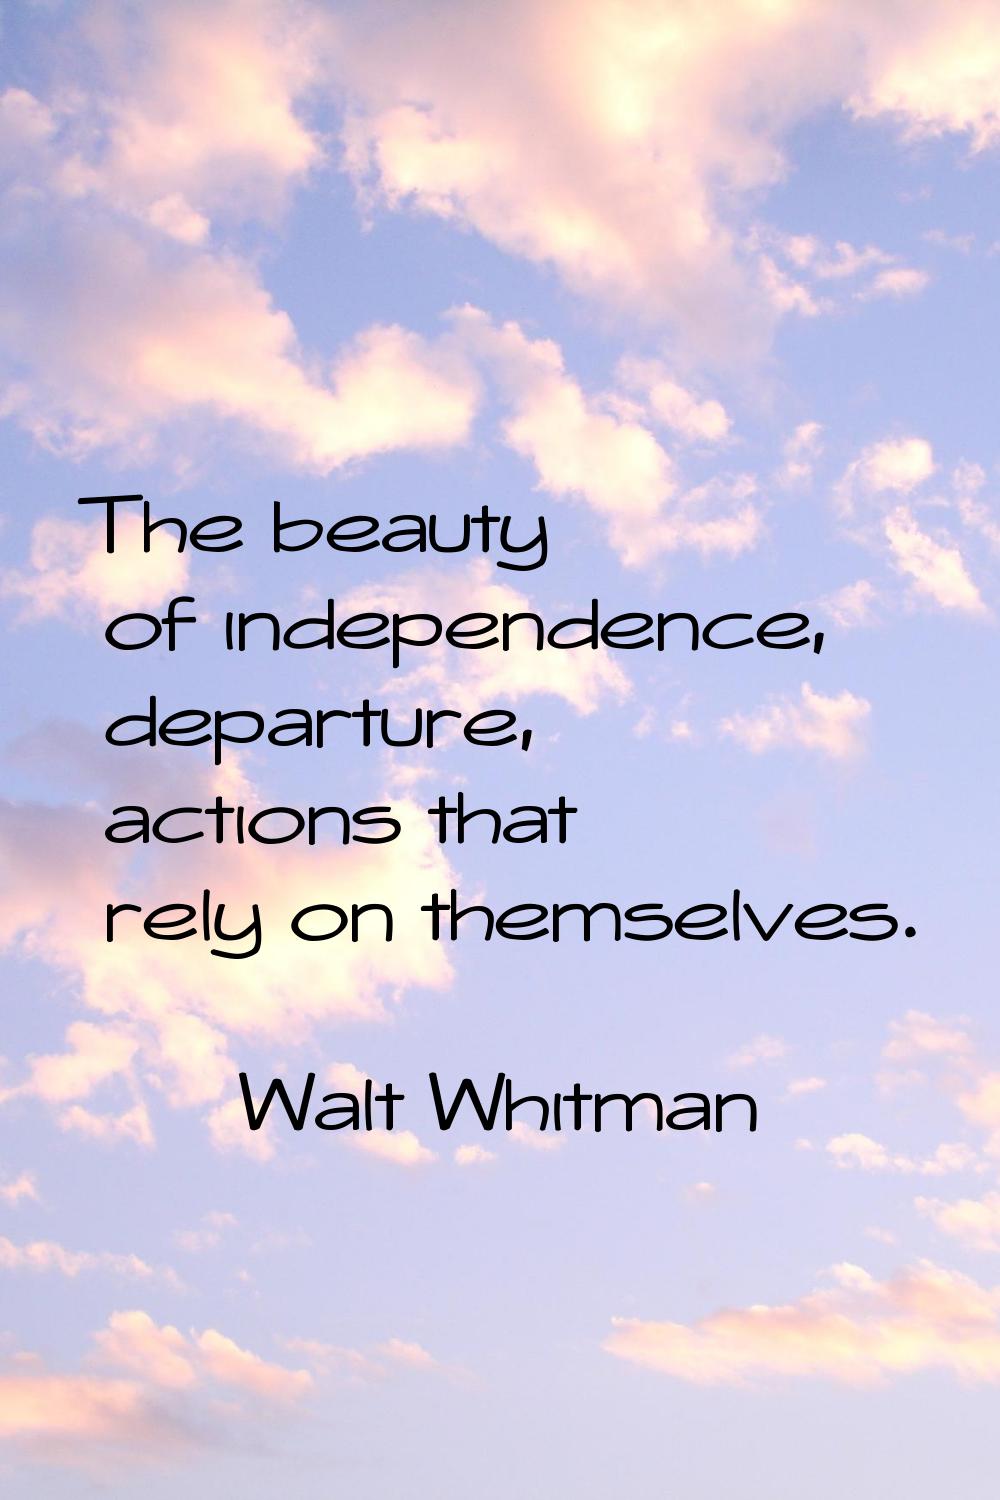 The beauty of independence, departure, actions that rely on themselves.